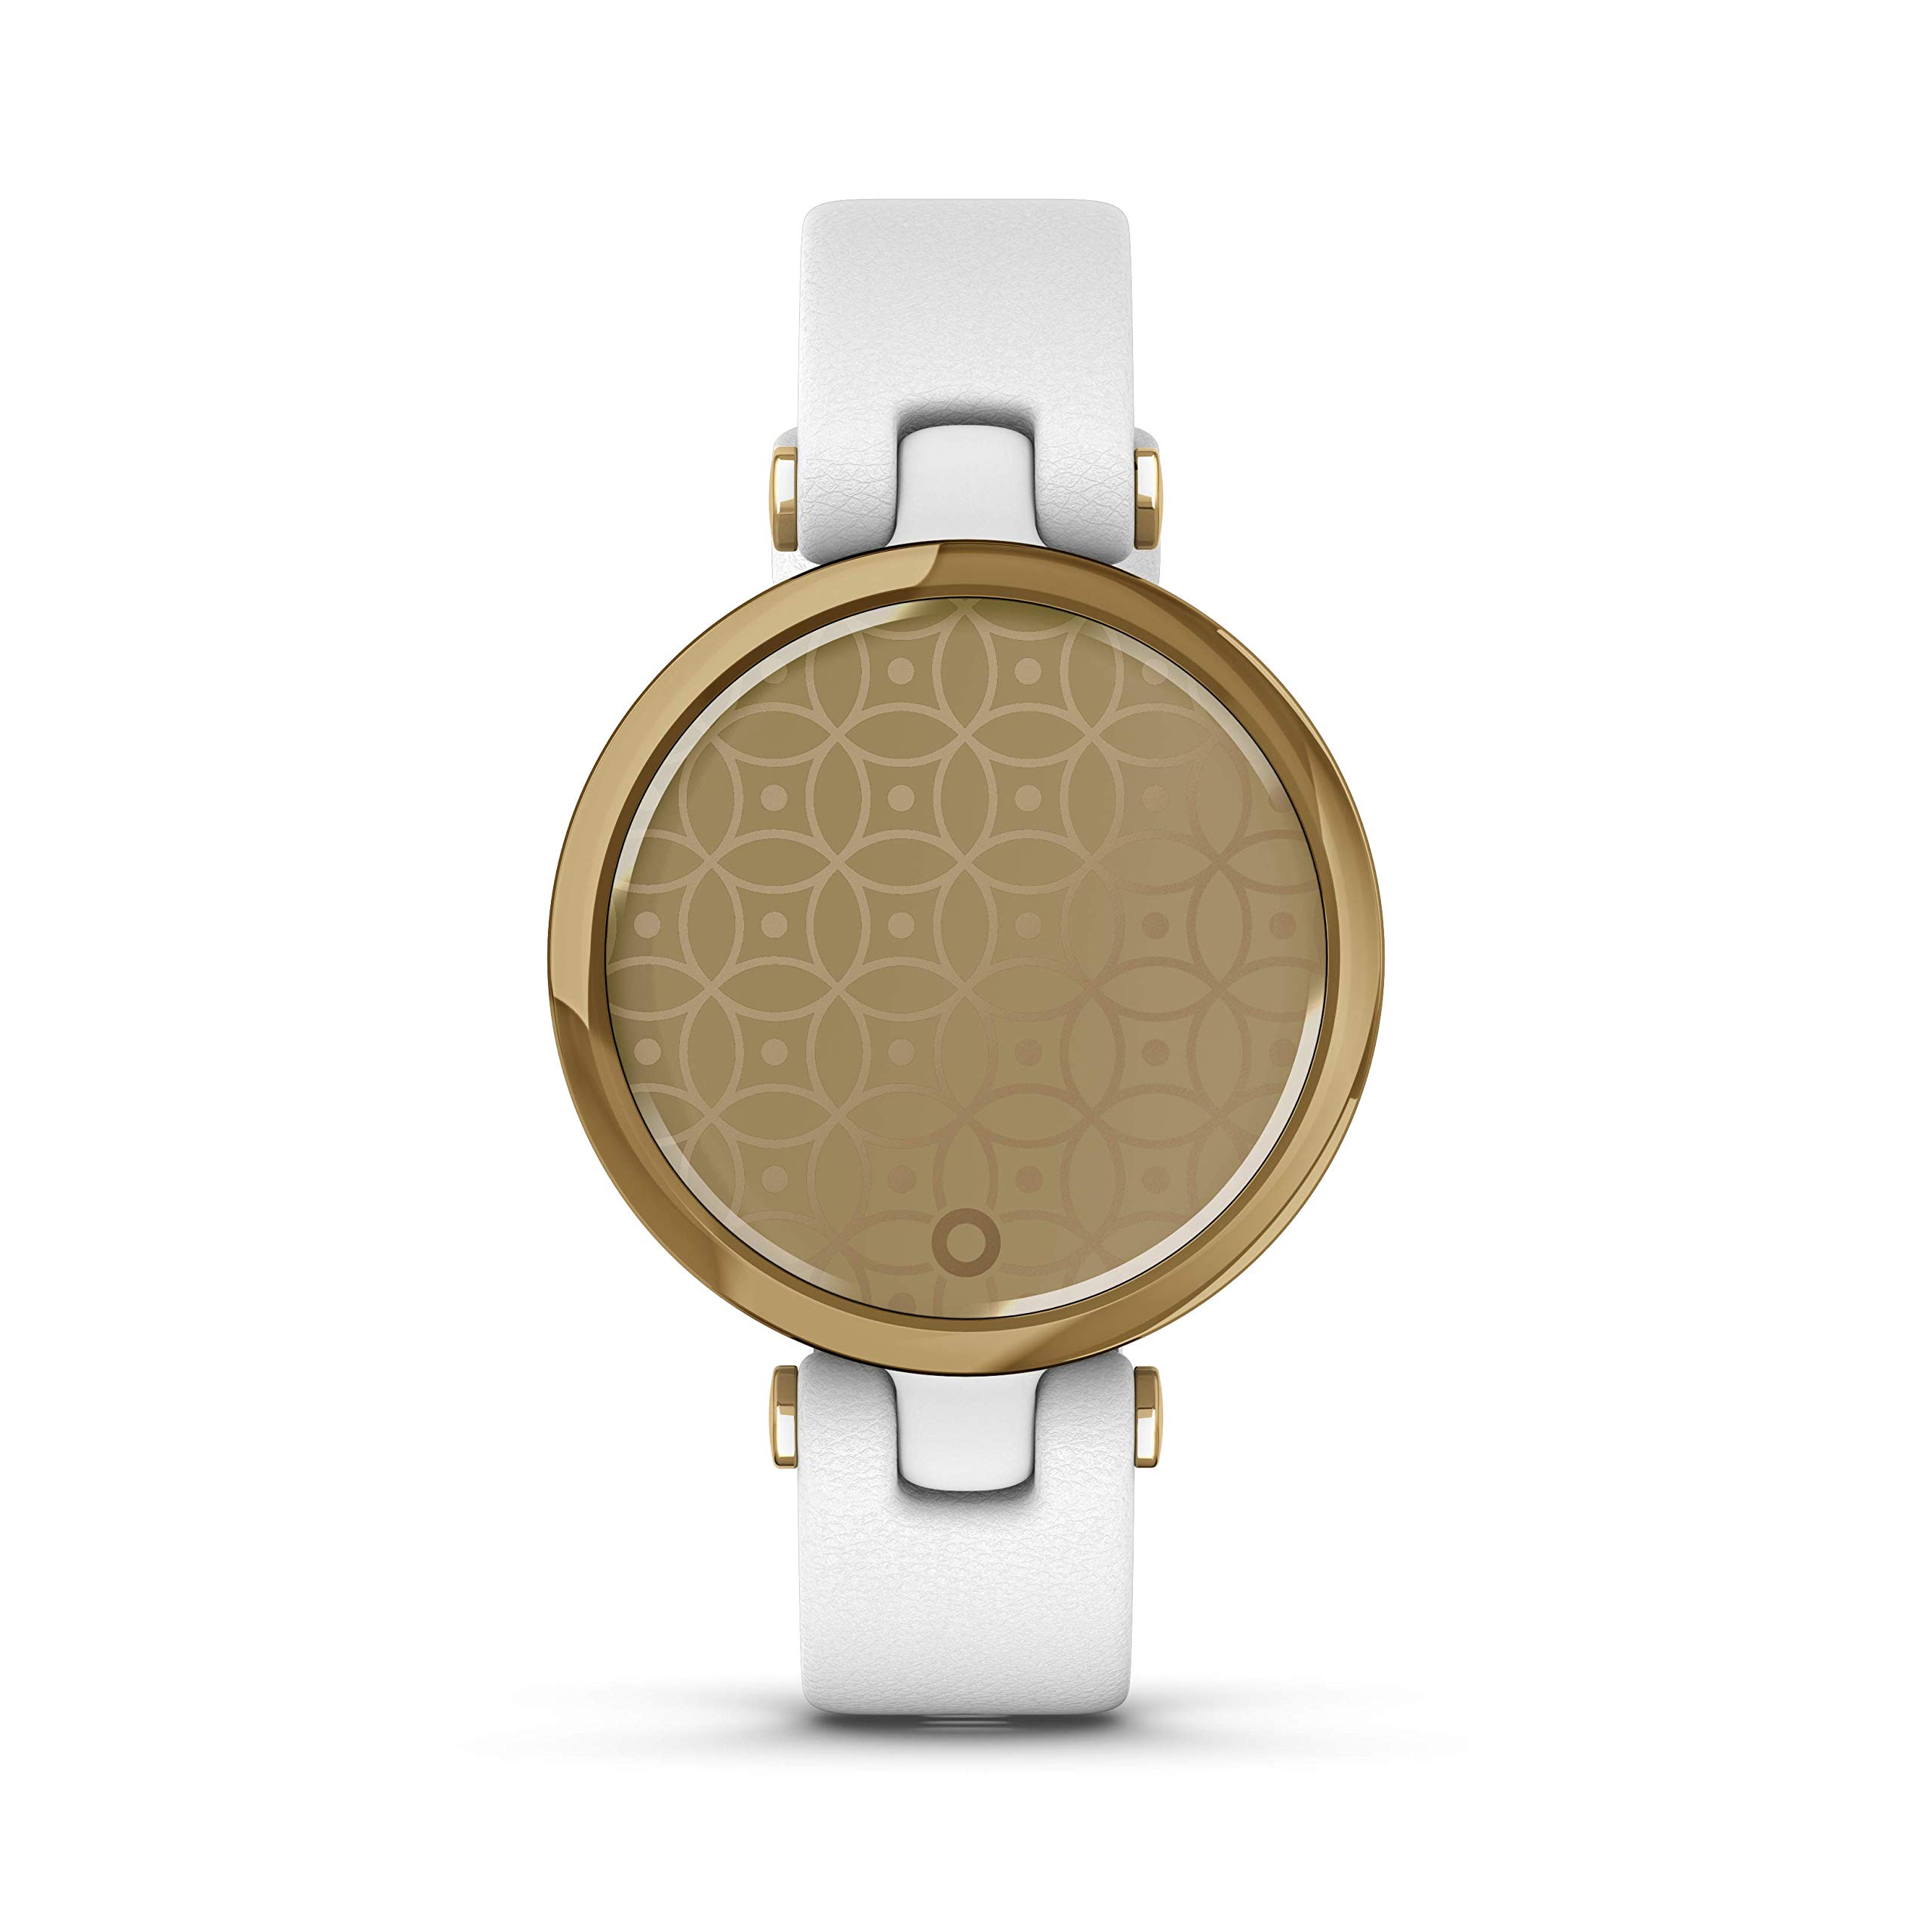 Garmin Lily™, Small Smartwatch with Touchscreen and Patterned Lens, Light Gold with White Leather Band